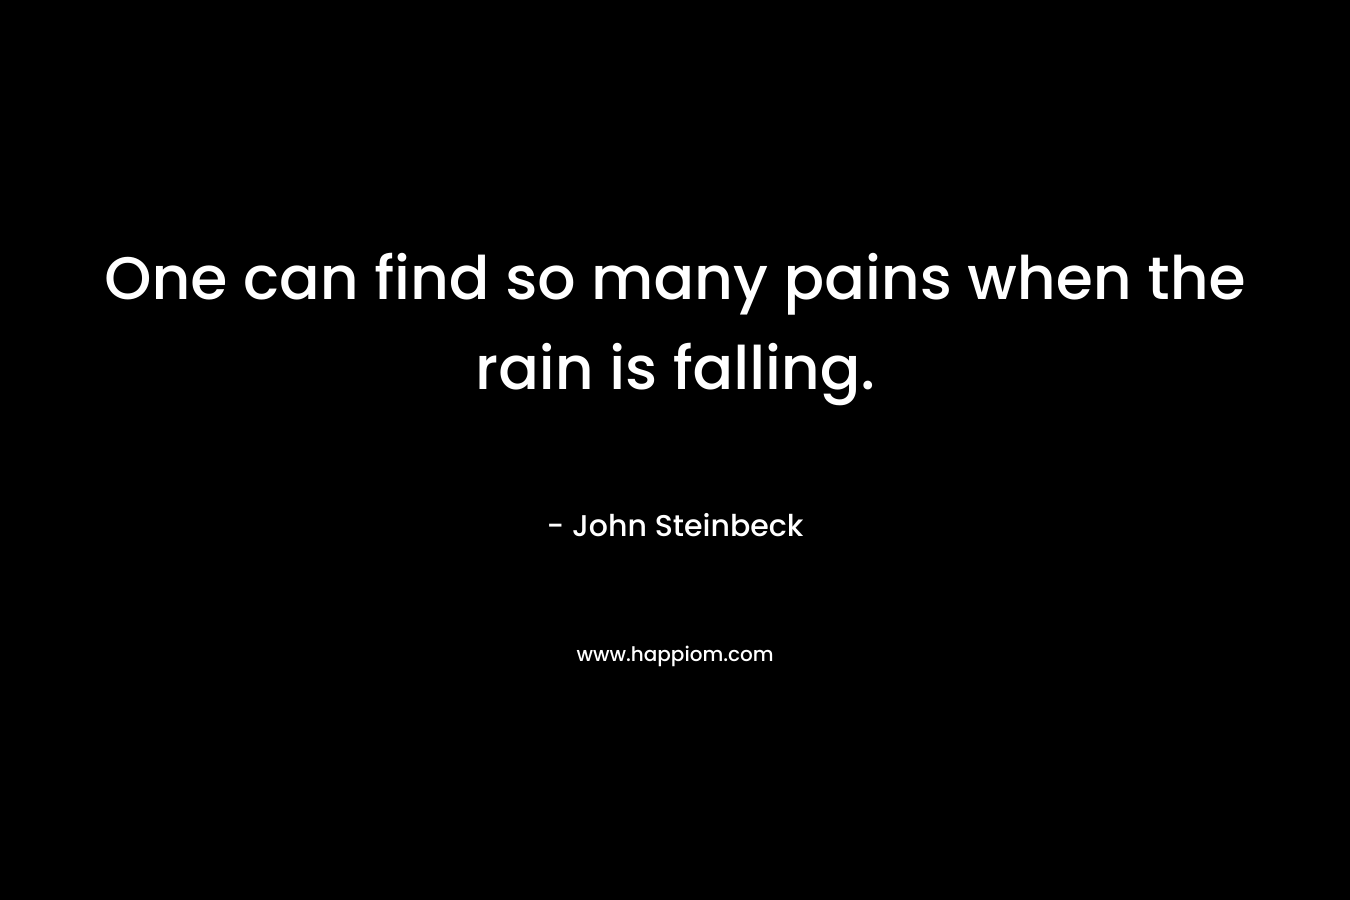 One can find so many pains when the rain is falling. – John Steinbeck